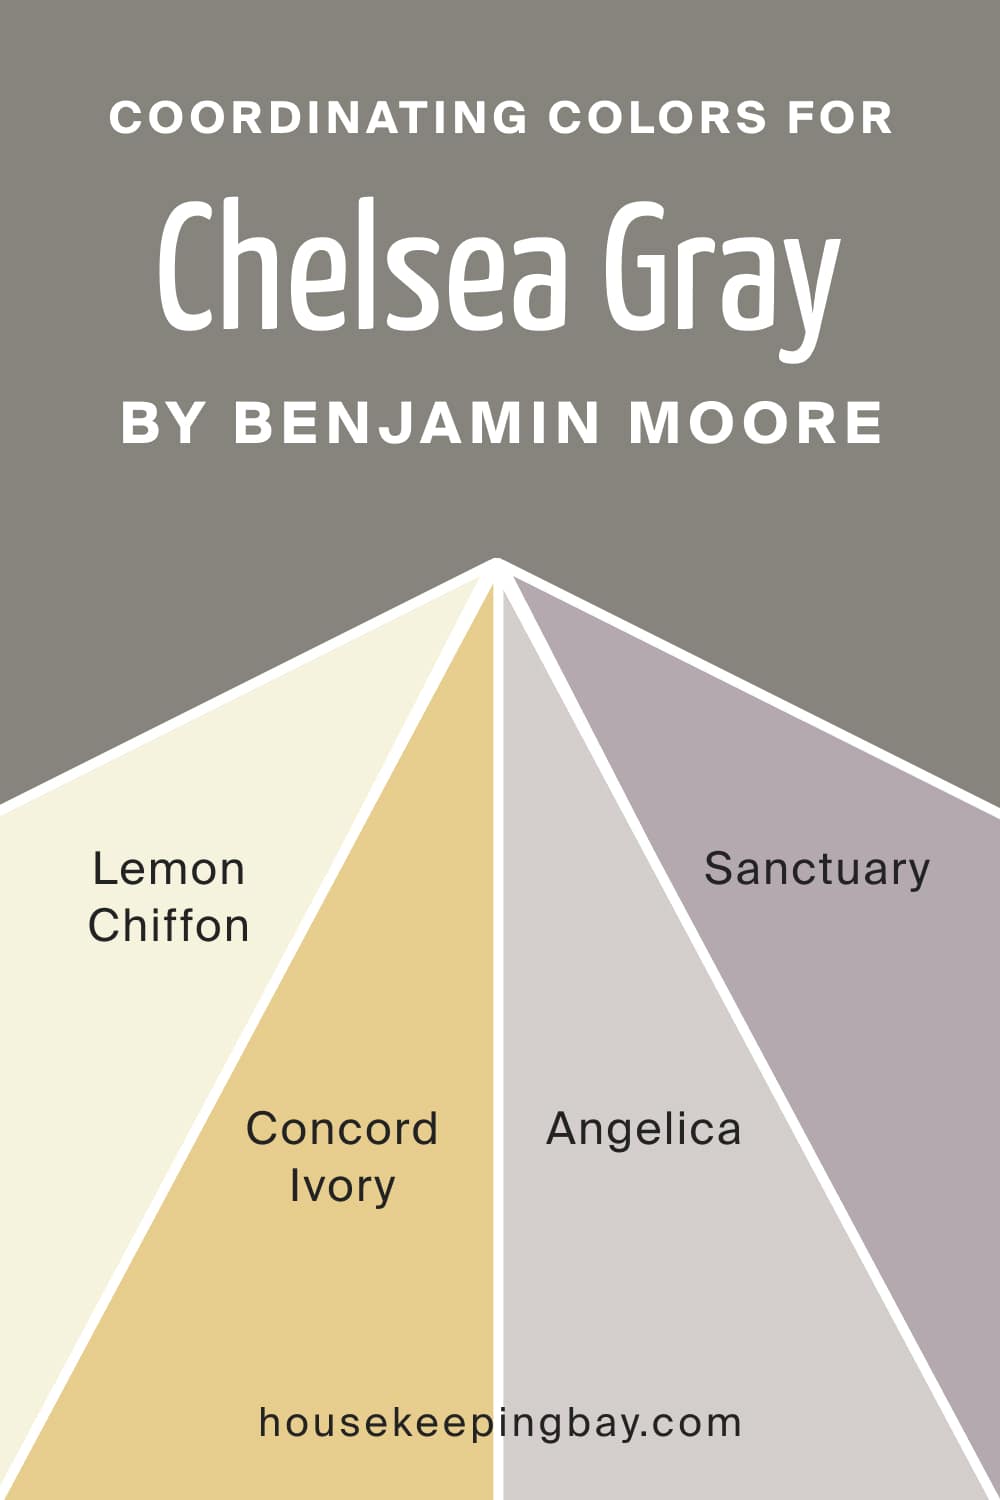 Coordinating Colors for Chelsea Gray HC 168 by Benjamin Moore